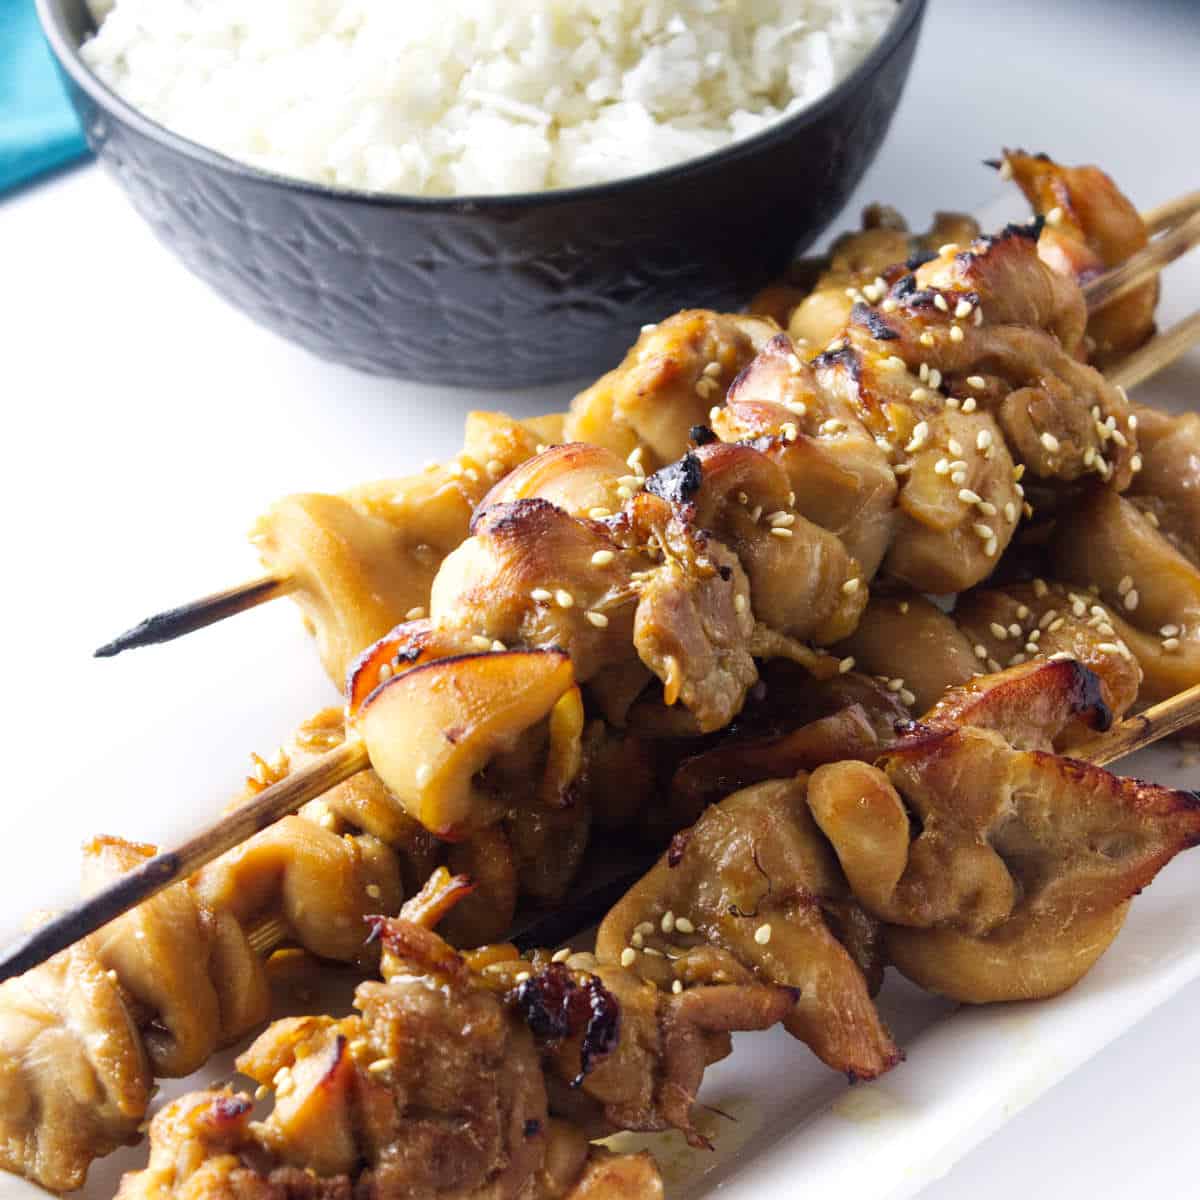 Platter of teriyaki chicken on a stick and a bowl of white steamed rice.